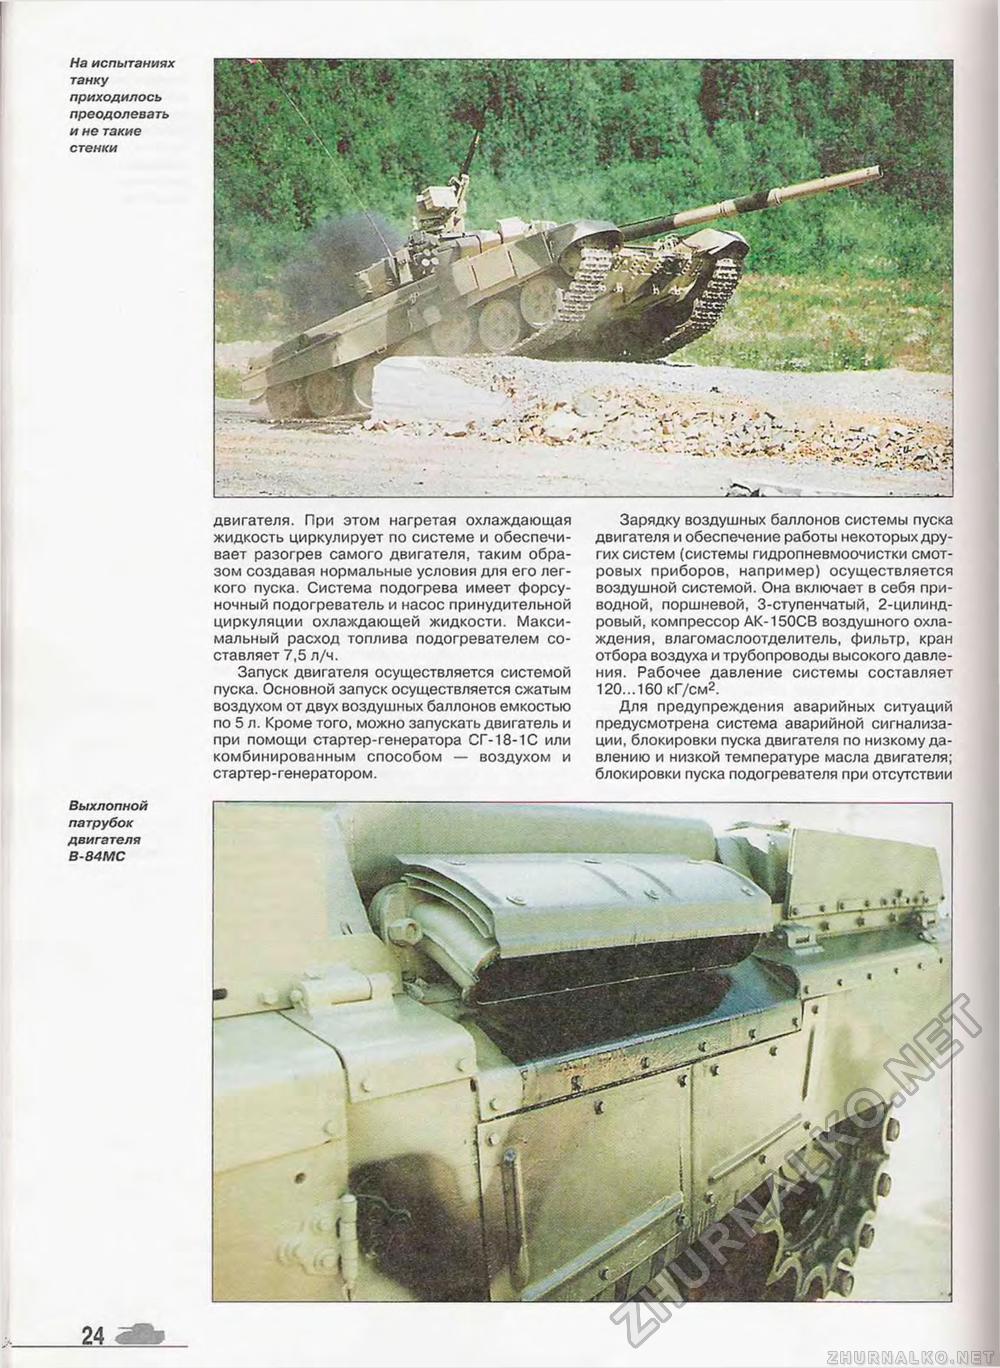  Special - T-90,  26